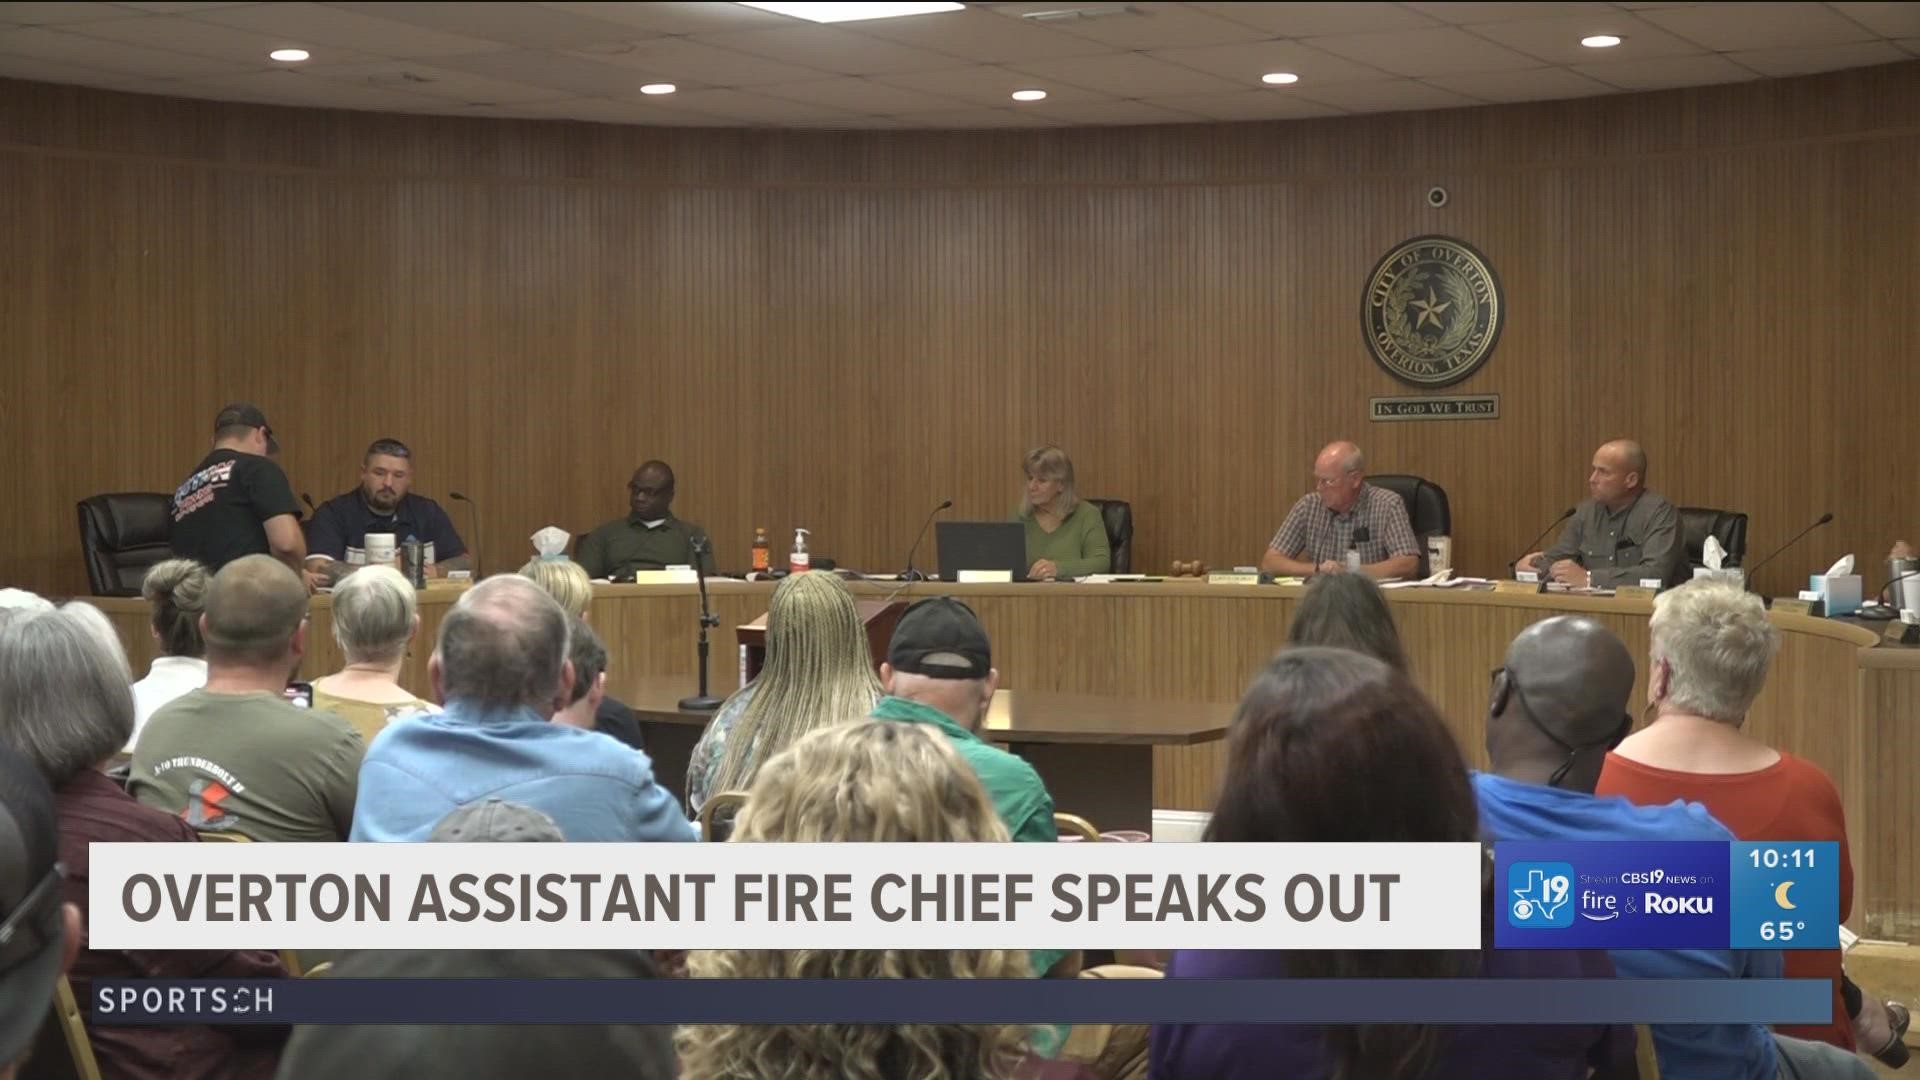 Overton assistant fire chief resigns, alleges bullying from city officials